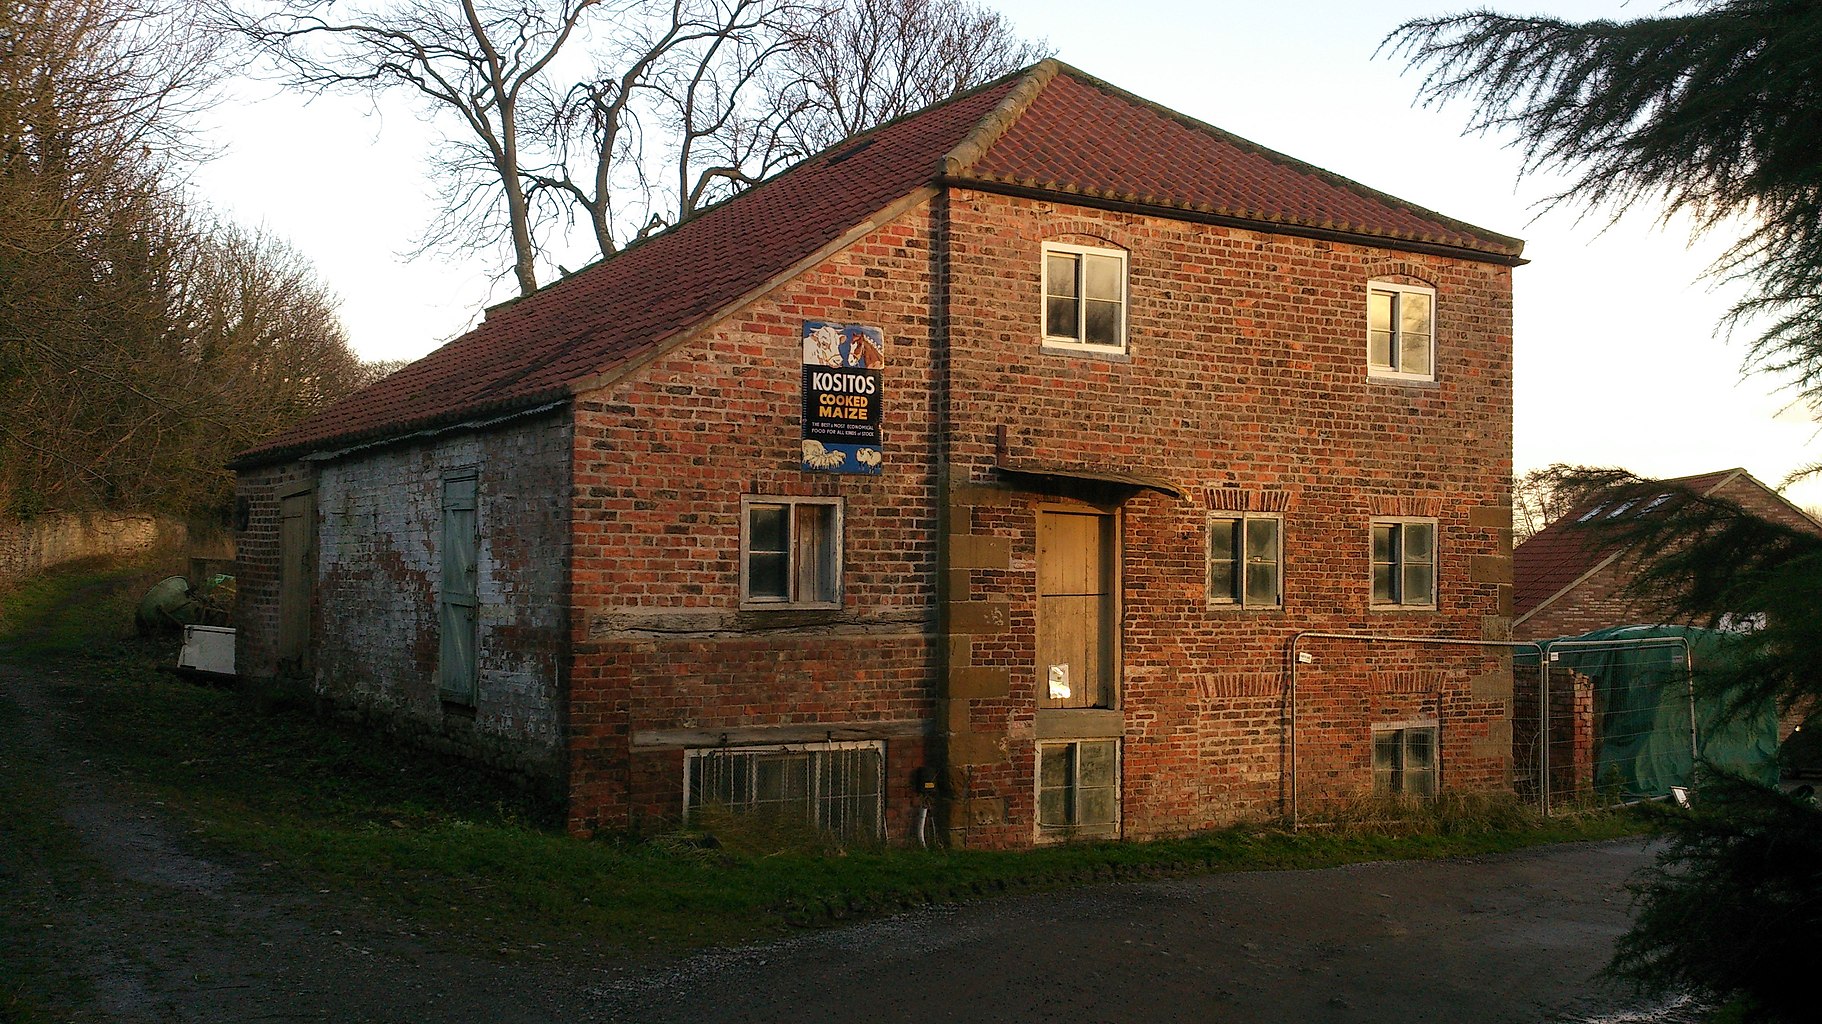 Aiskew Mill is a grade 2 listed building, It was first listed on the 6th of October 1981. Water-mill. Late 18th to mid 19th century, red brick, 3 storey water mill.